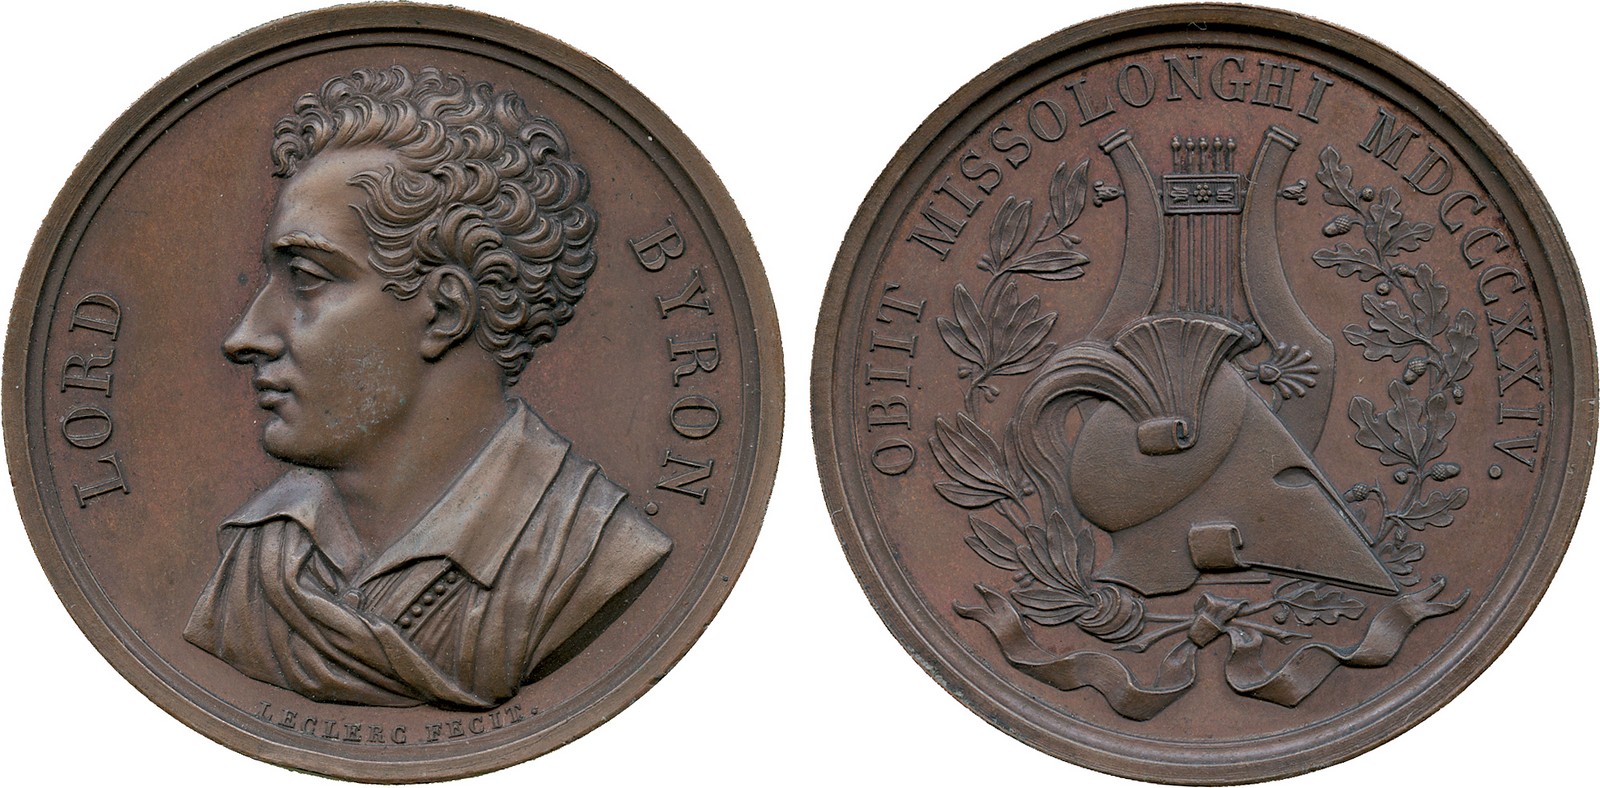 COMMEMORATIVE MEDALS, A Collection of Medals Relating to Lord Byron, Lord Byron (1788-1824),